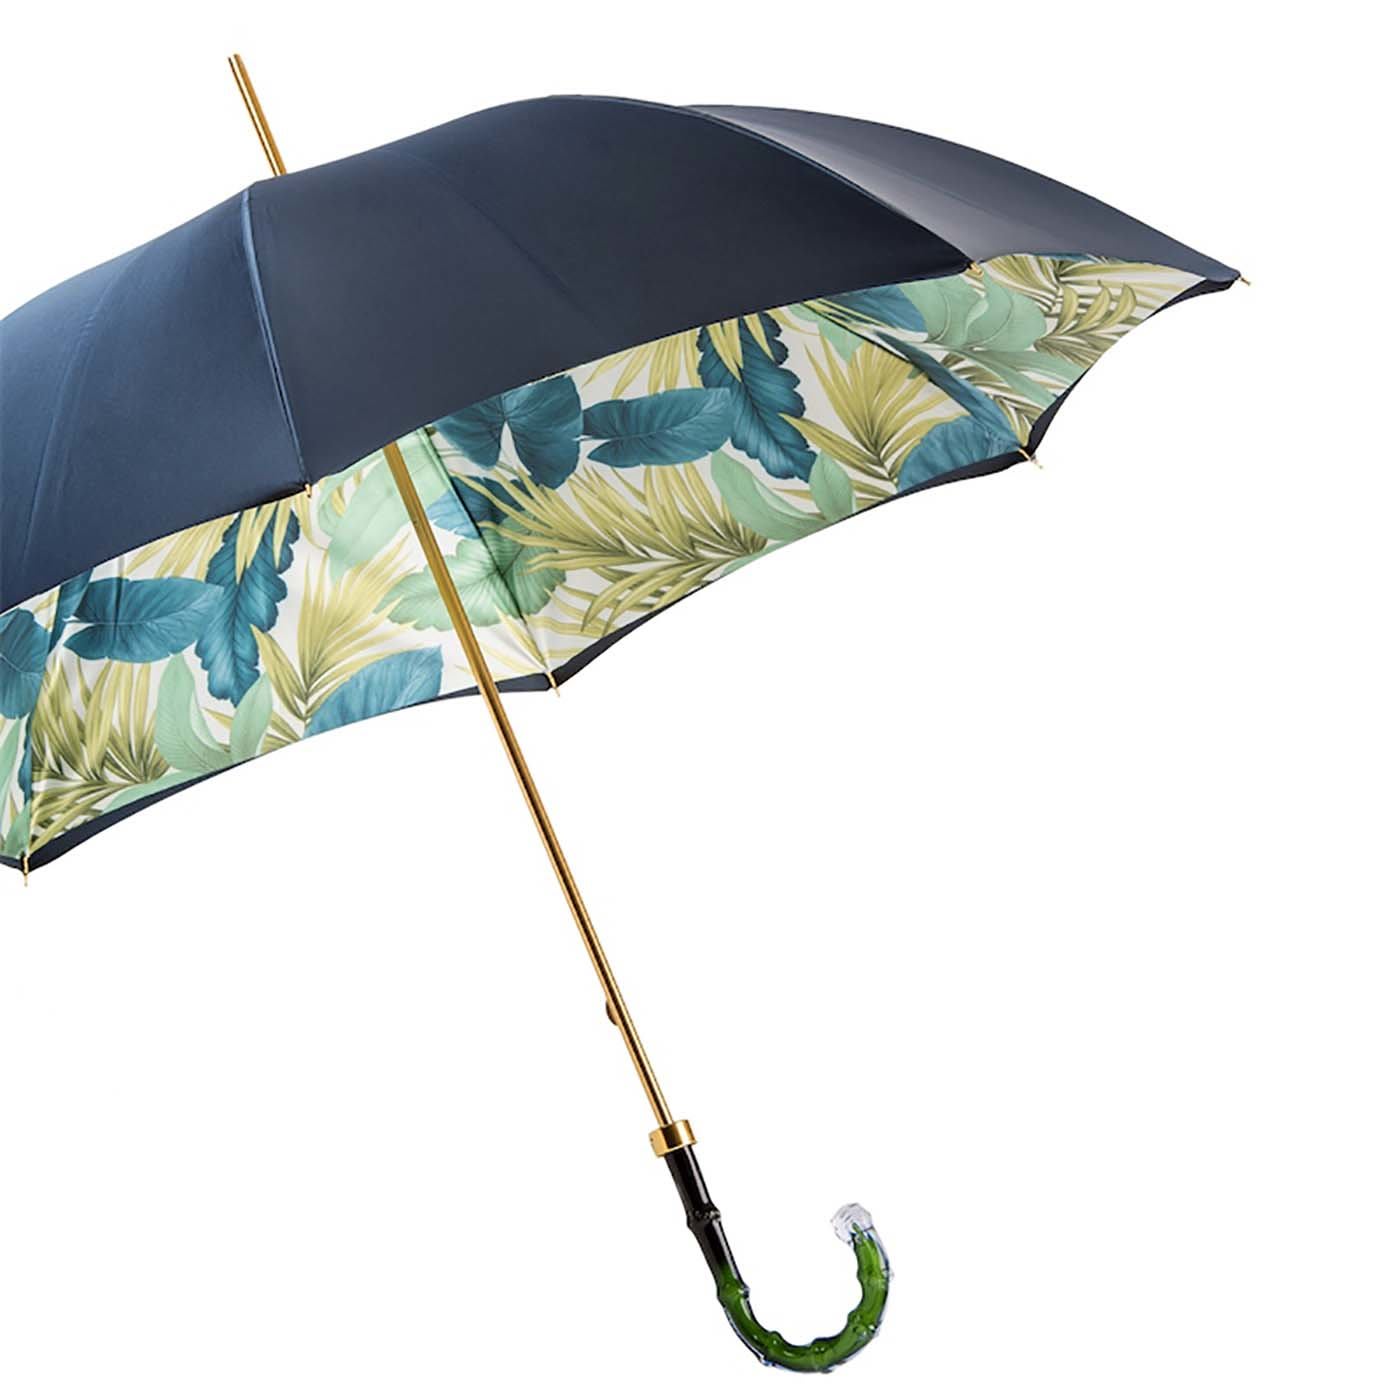 Tropical Umbrella with Green Acetate Handle - Pasotti